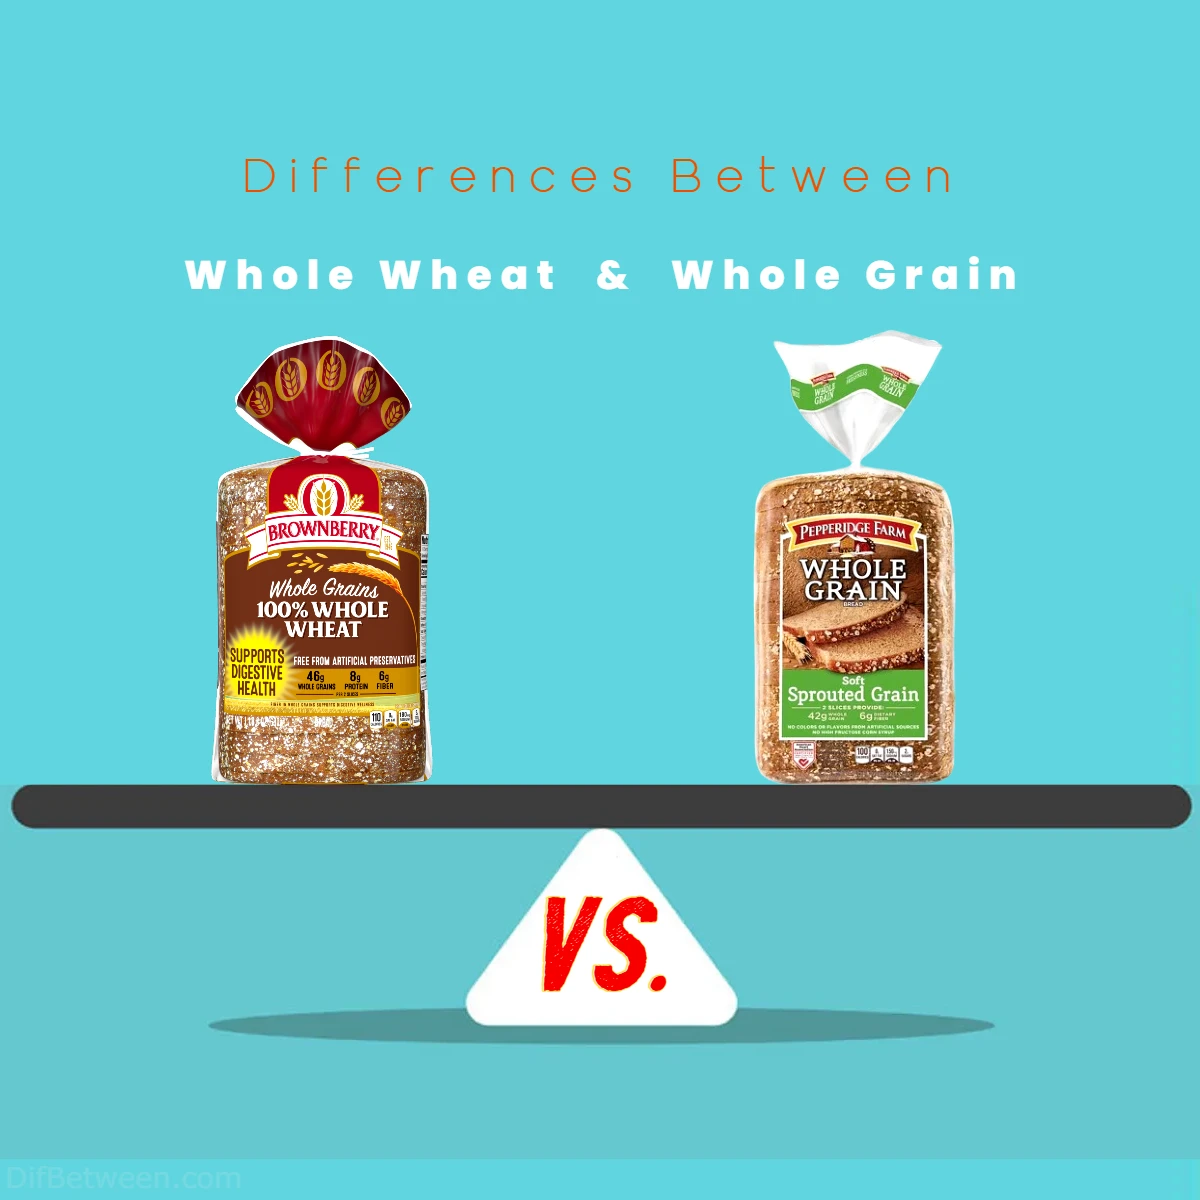 Differences Between Whole Wheat vs Whole Grain